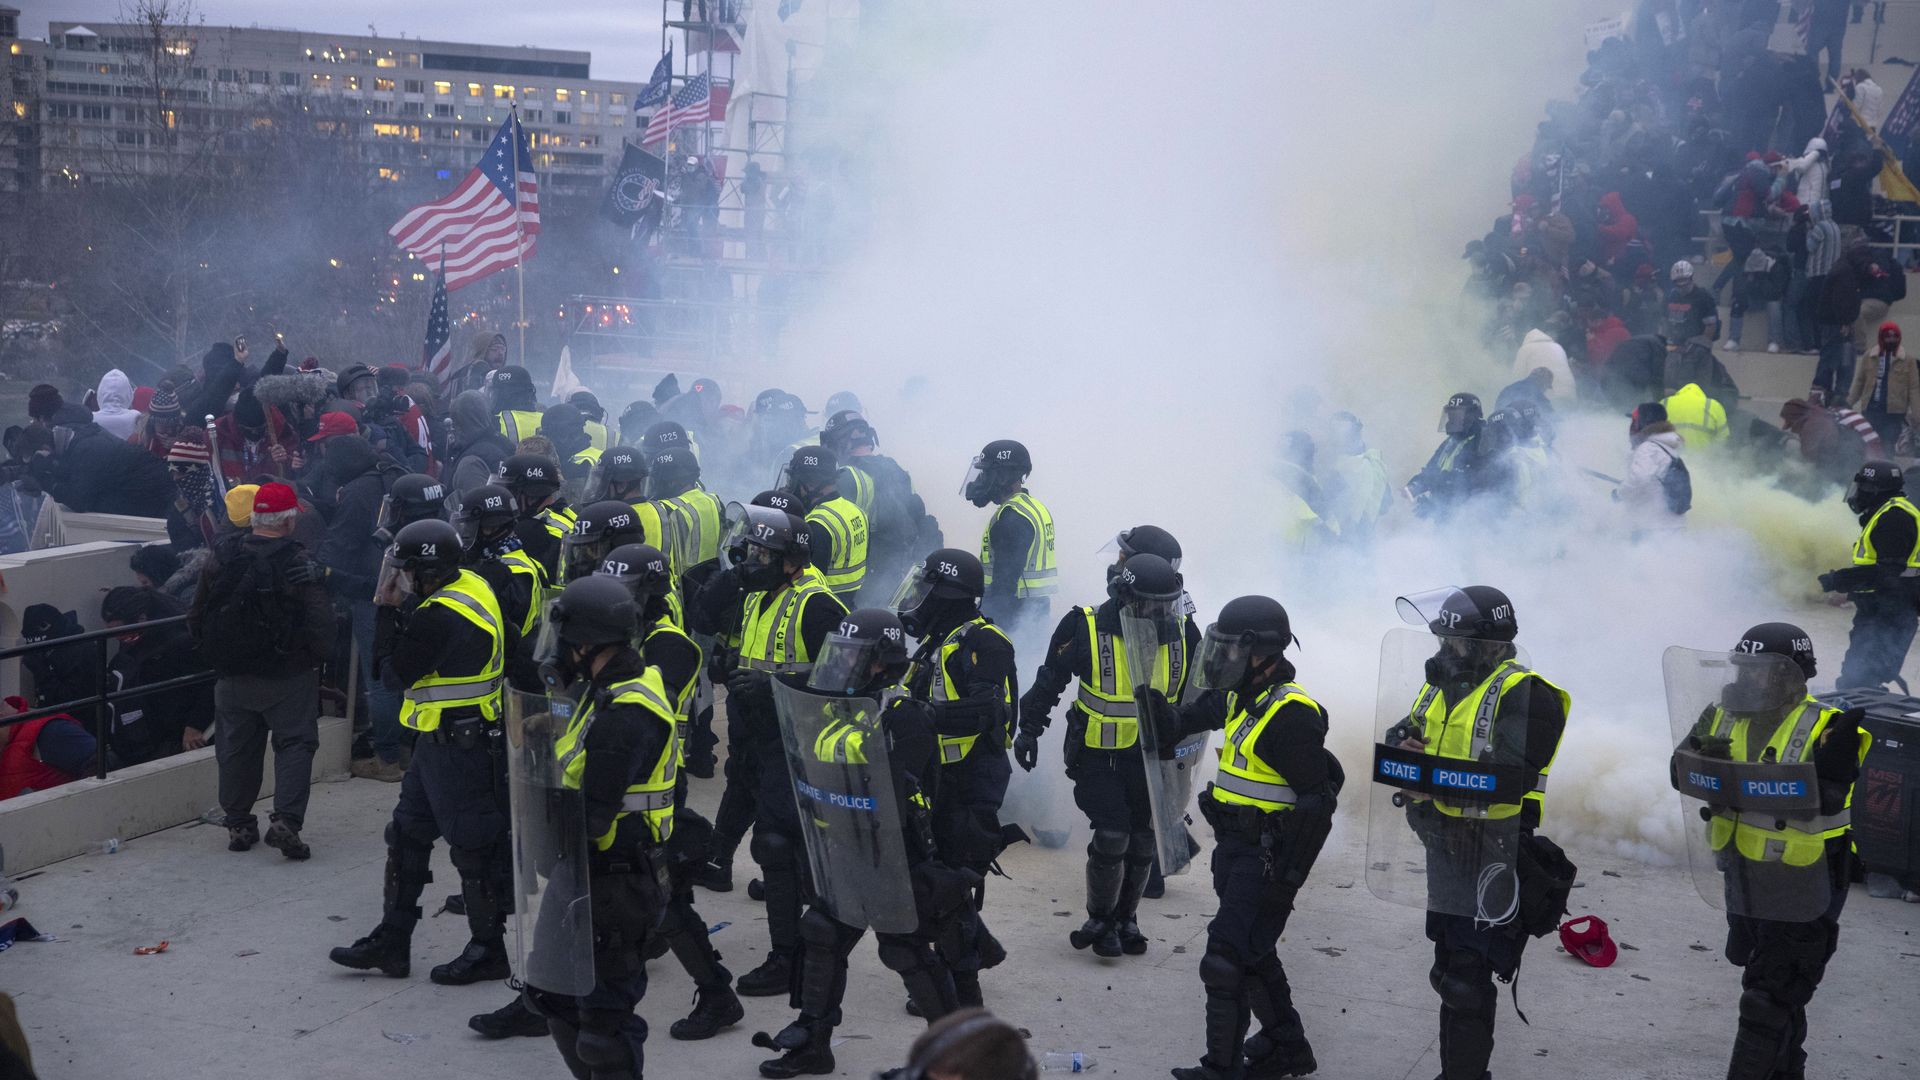 Capitol police use pepper spray and tear gas to clear the capitol. Trump supporters clashed with police and security forces as people try to storm the US Capitol in Washington D.C on January 6, 2021.